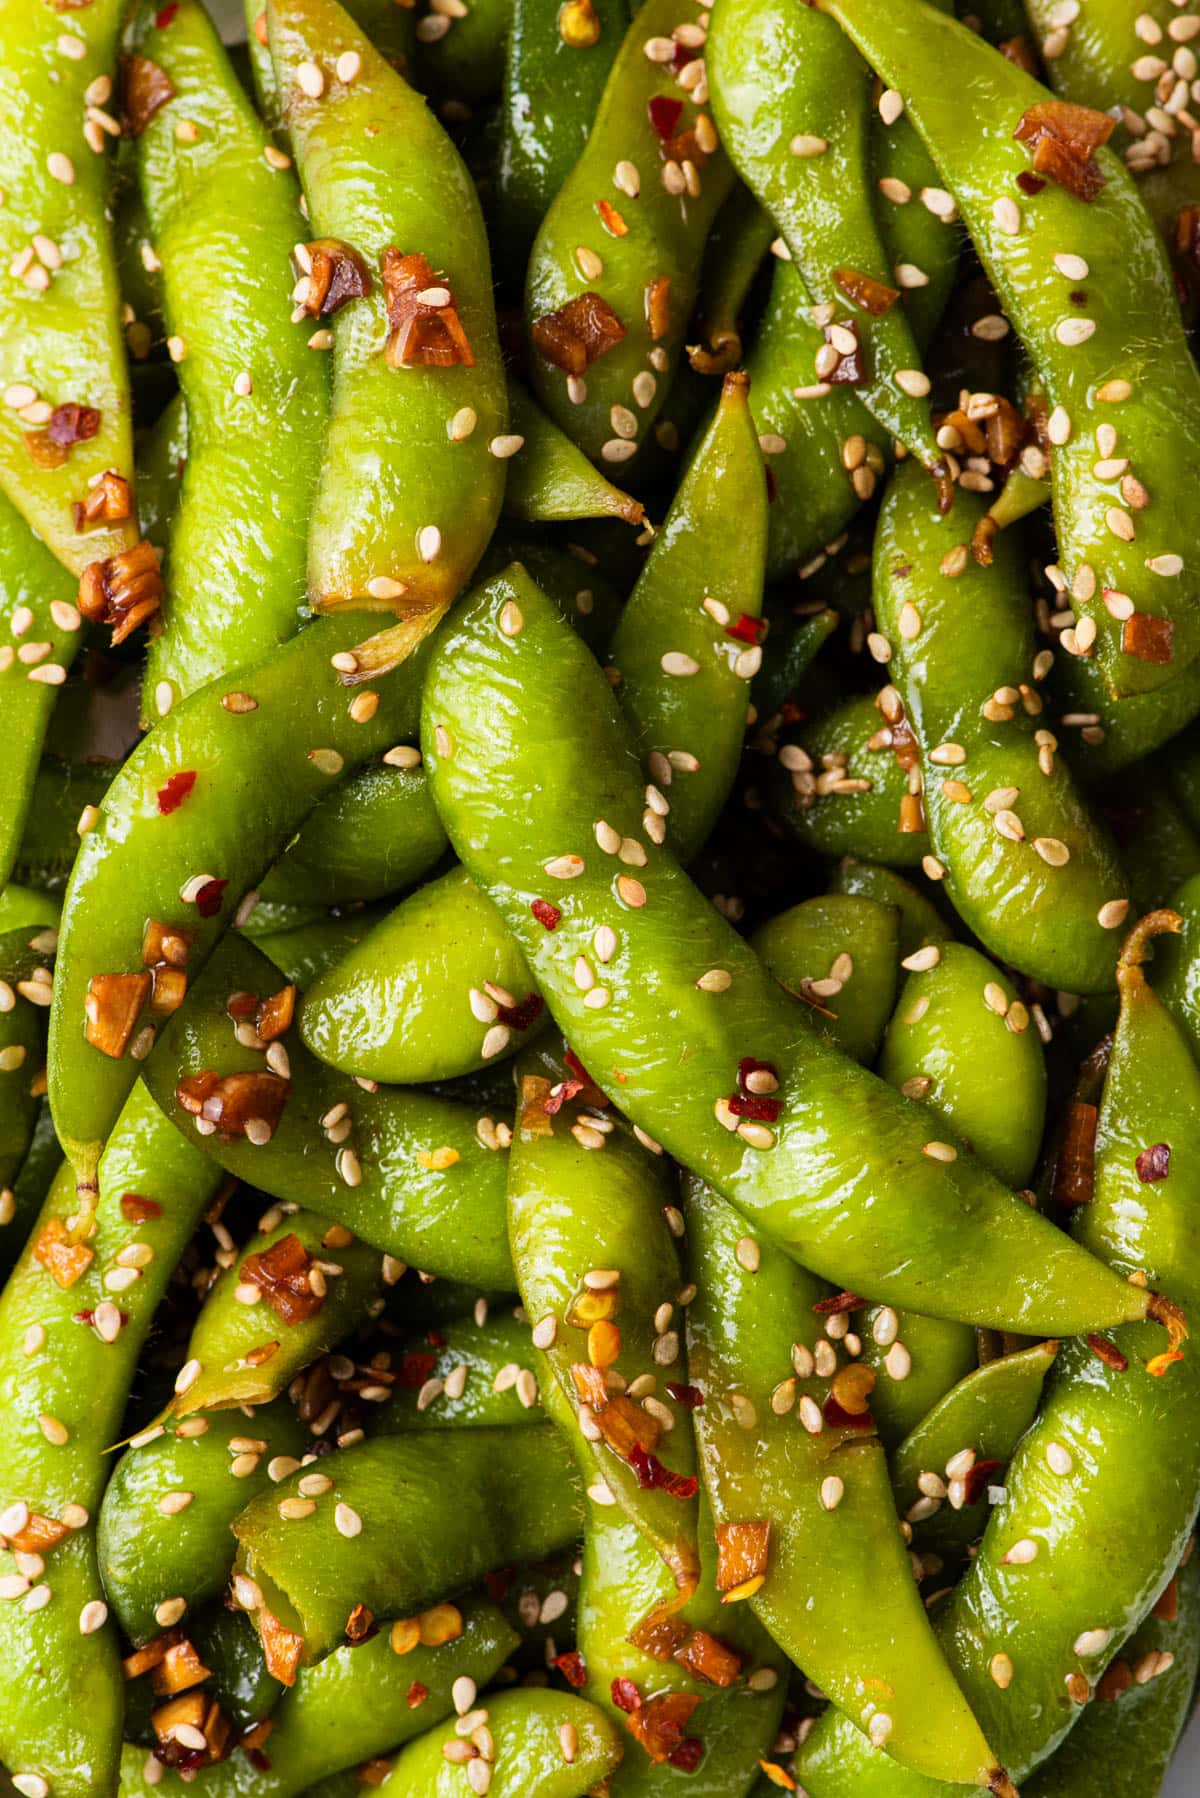 Cooked edamame pods coated in a garlic, ginger, and sesame mixture.